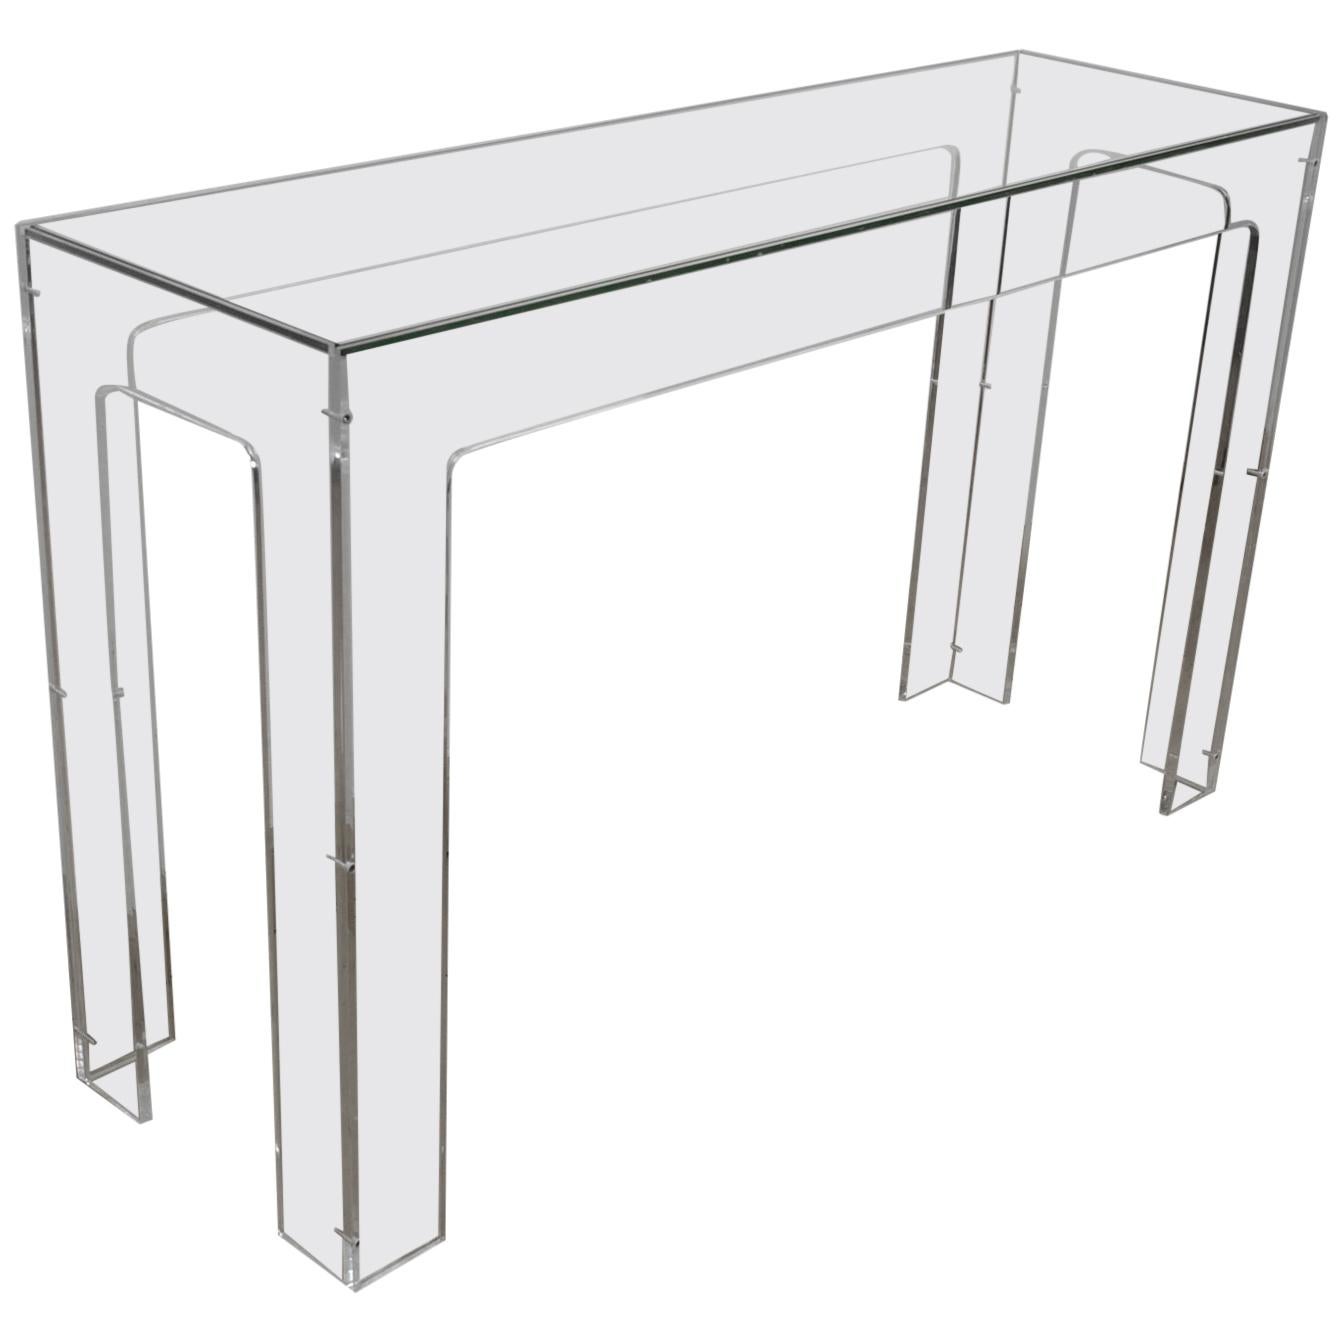 1970s Lucite Console Table with Glass Top